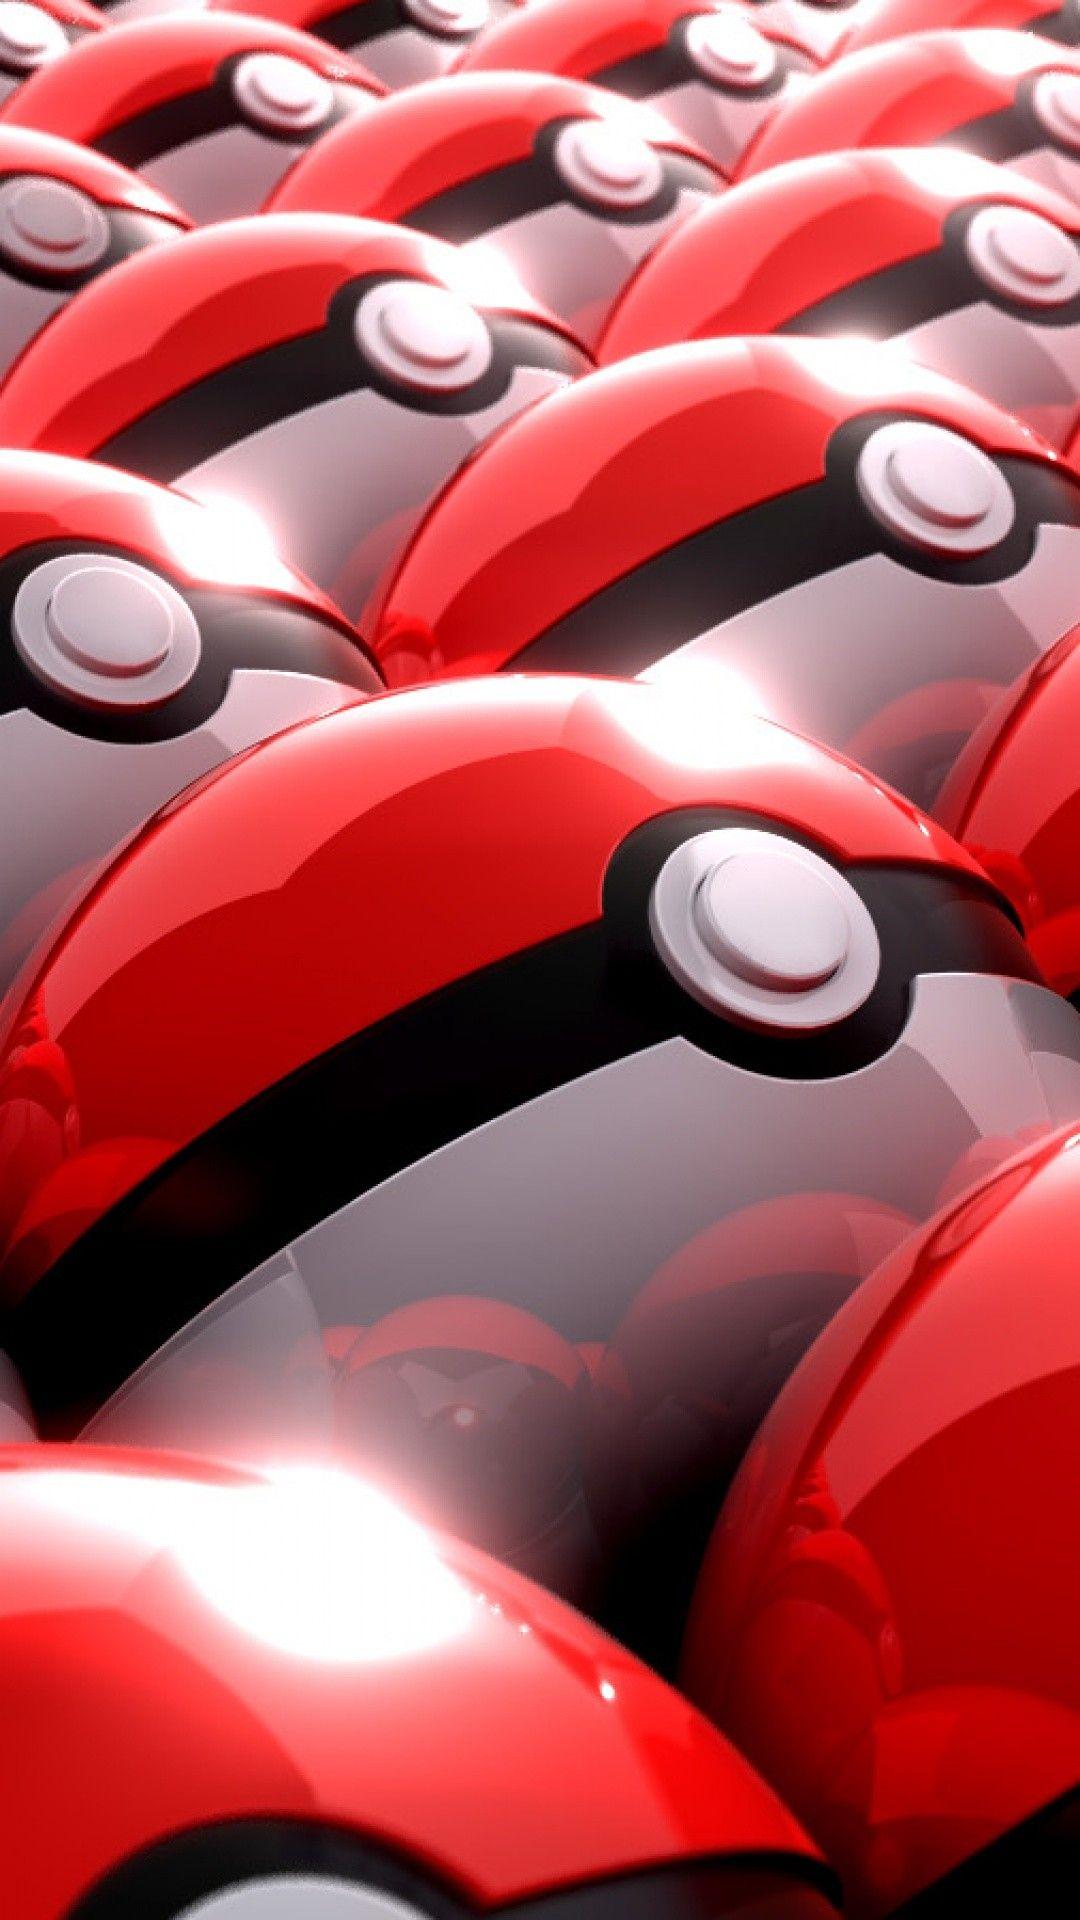 Pokeball iPhone Wallpapers - Top Free Pokeball iPhone Backgrounds